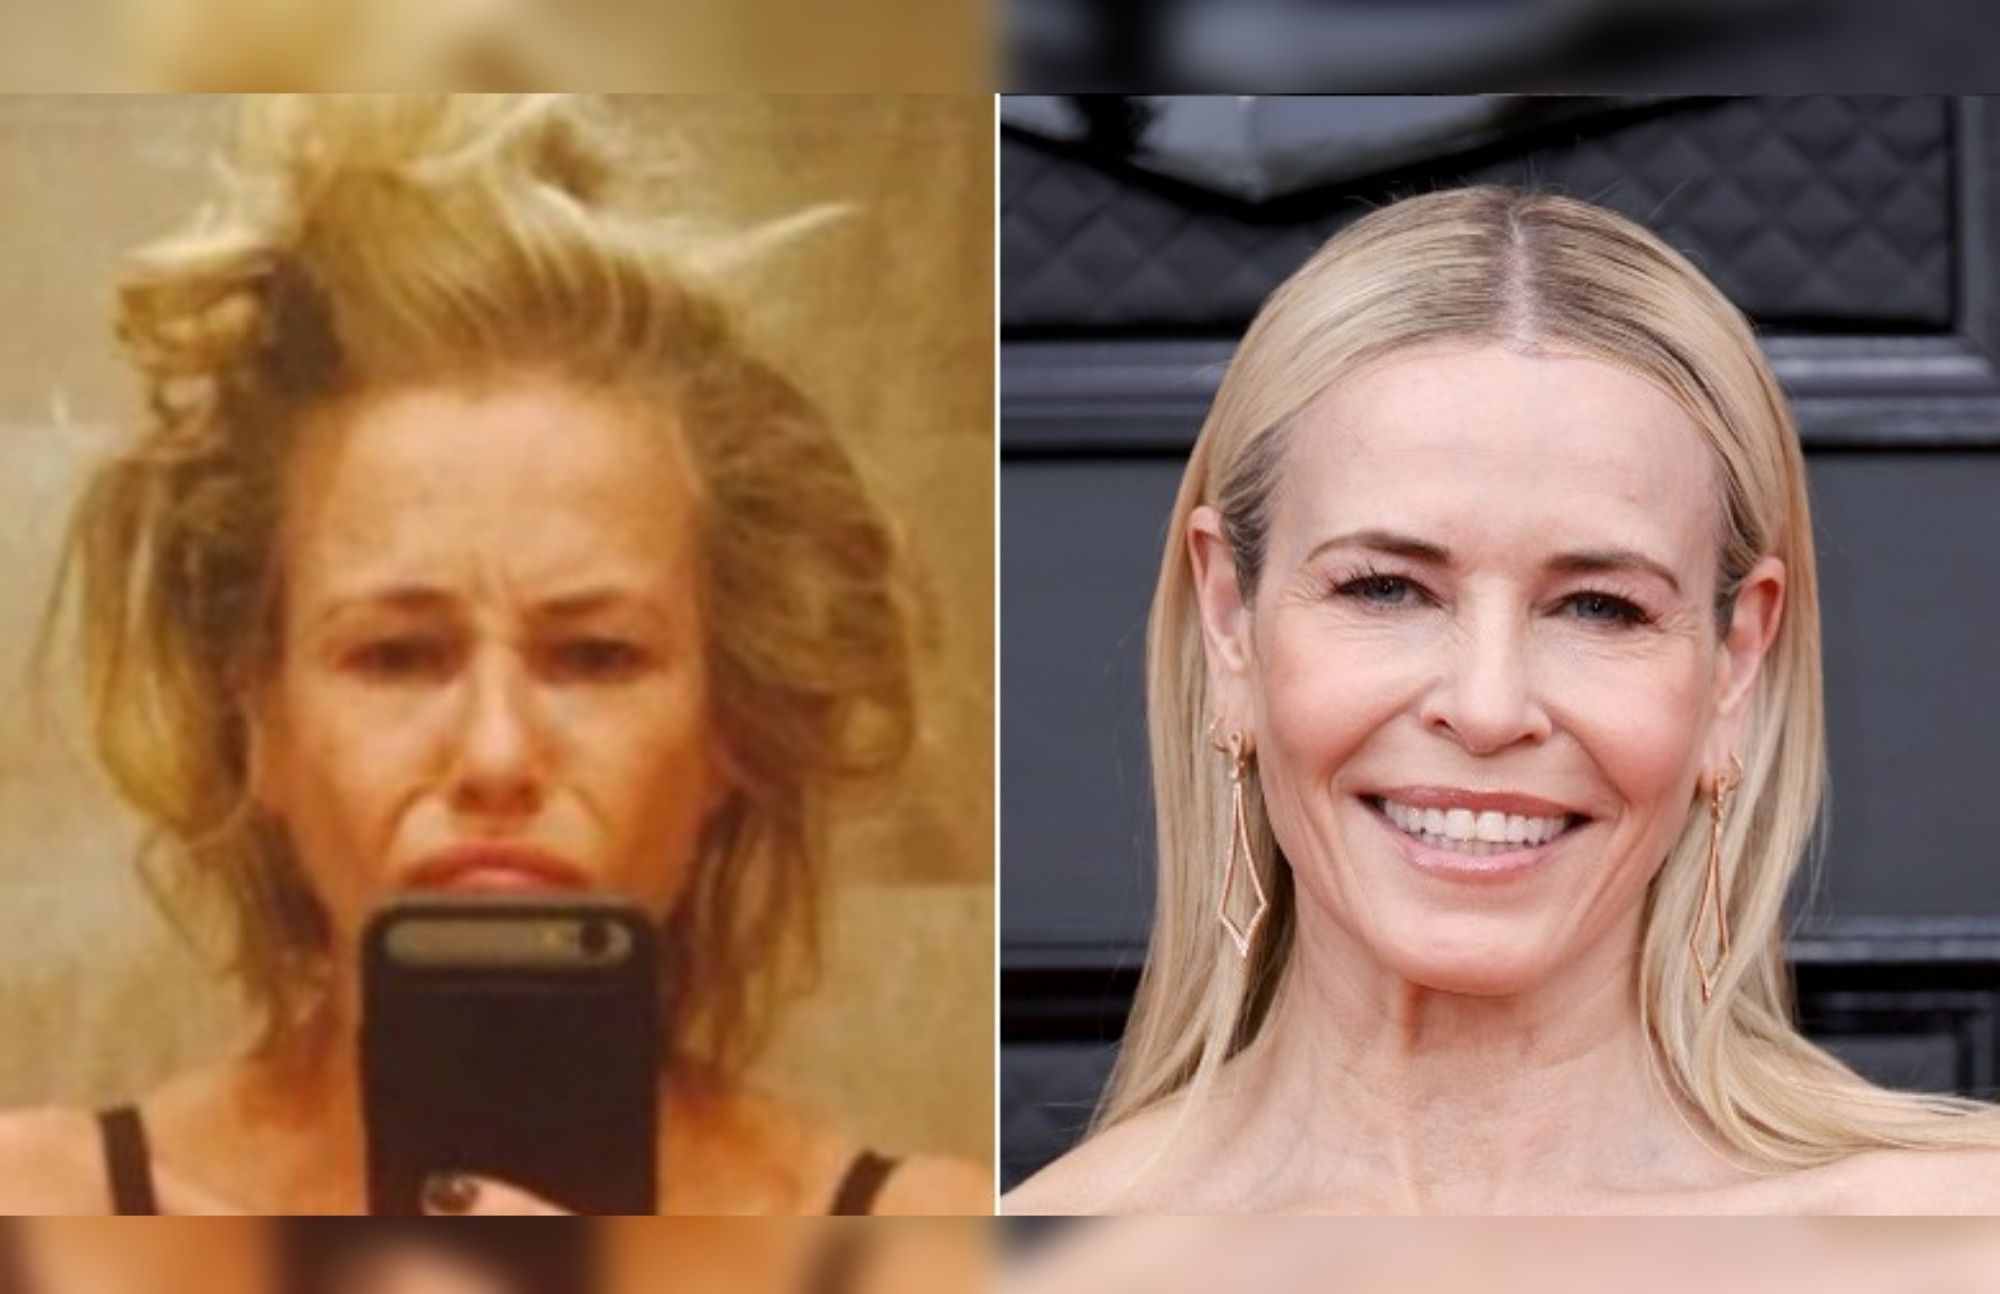 On the left, Chelsea Handler is taking a selfie without makeup, and on the right, she is wearing full makeup